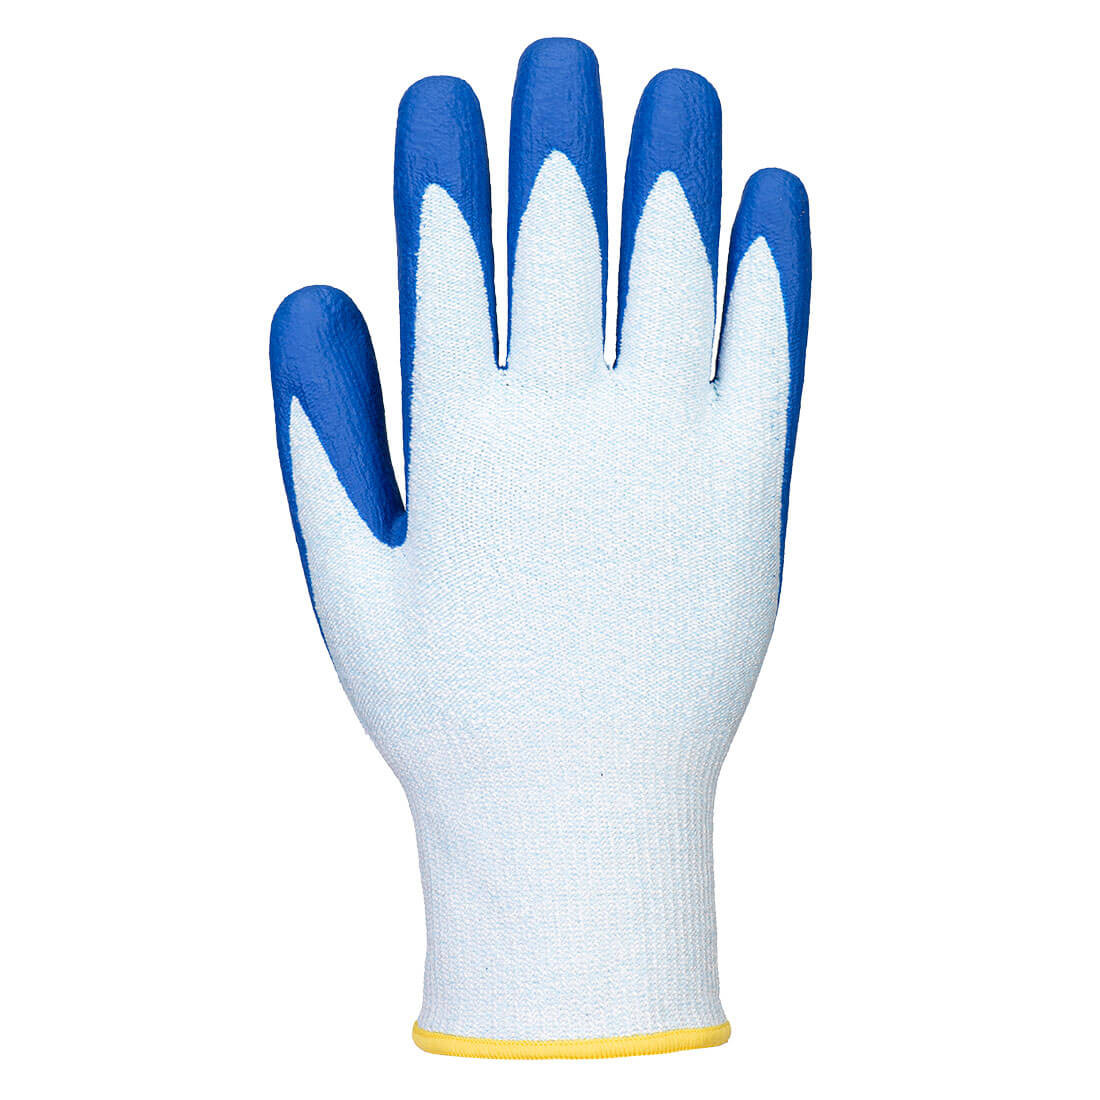 FD Cut C13 Nitrile Glove - Personal protection